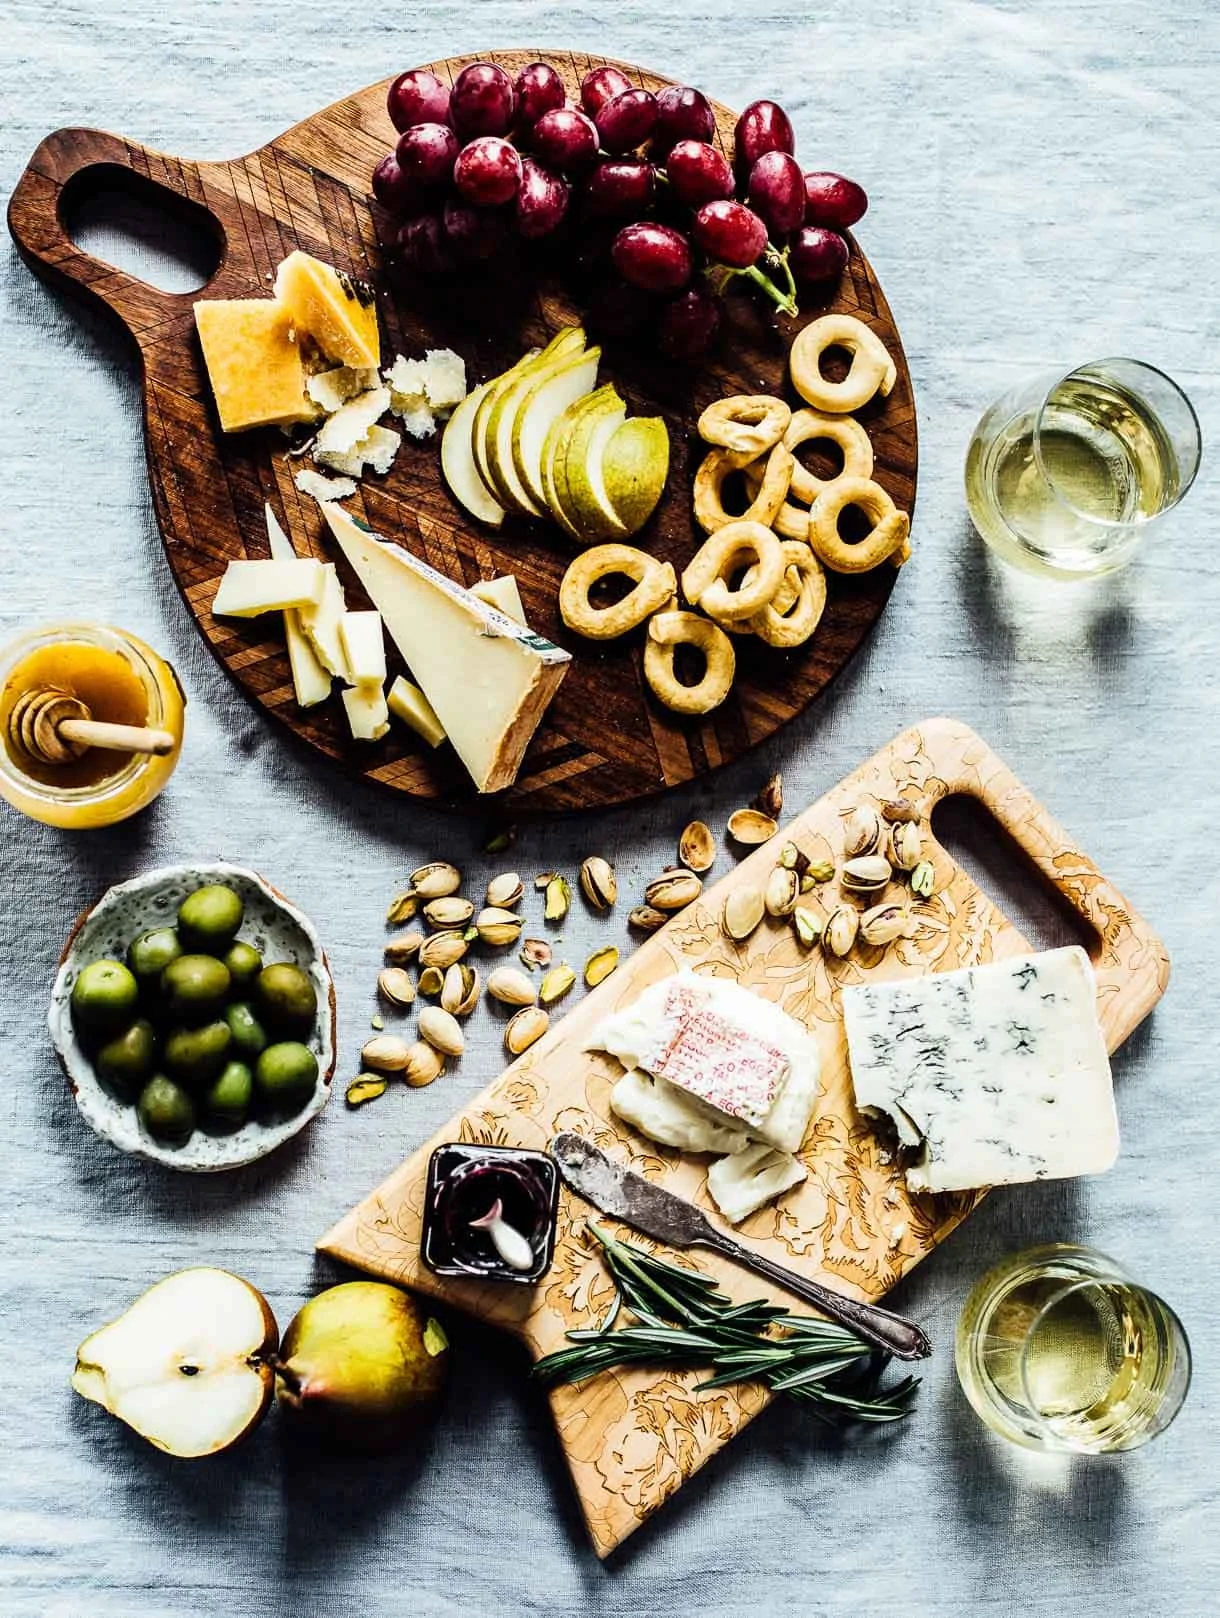 How to Make an Italian Cheese Board, with wine pairings